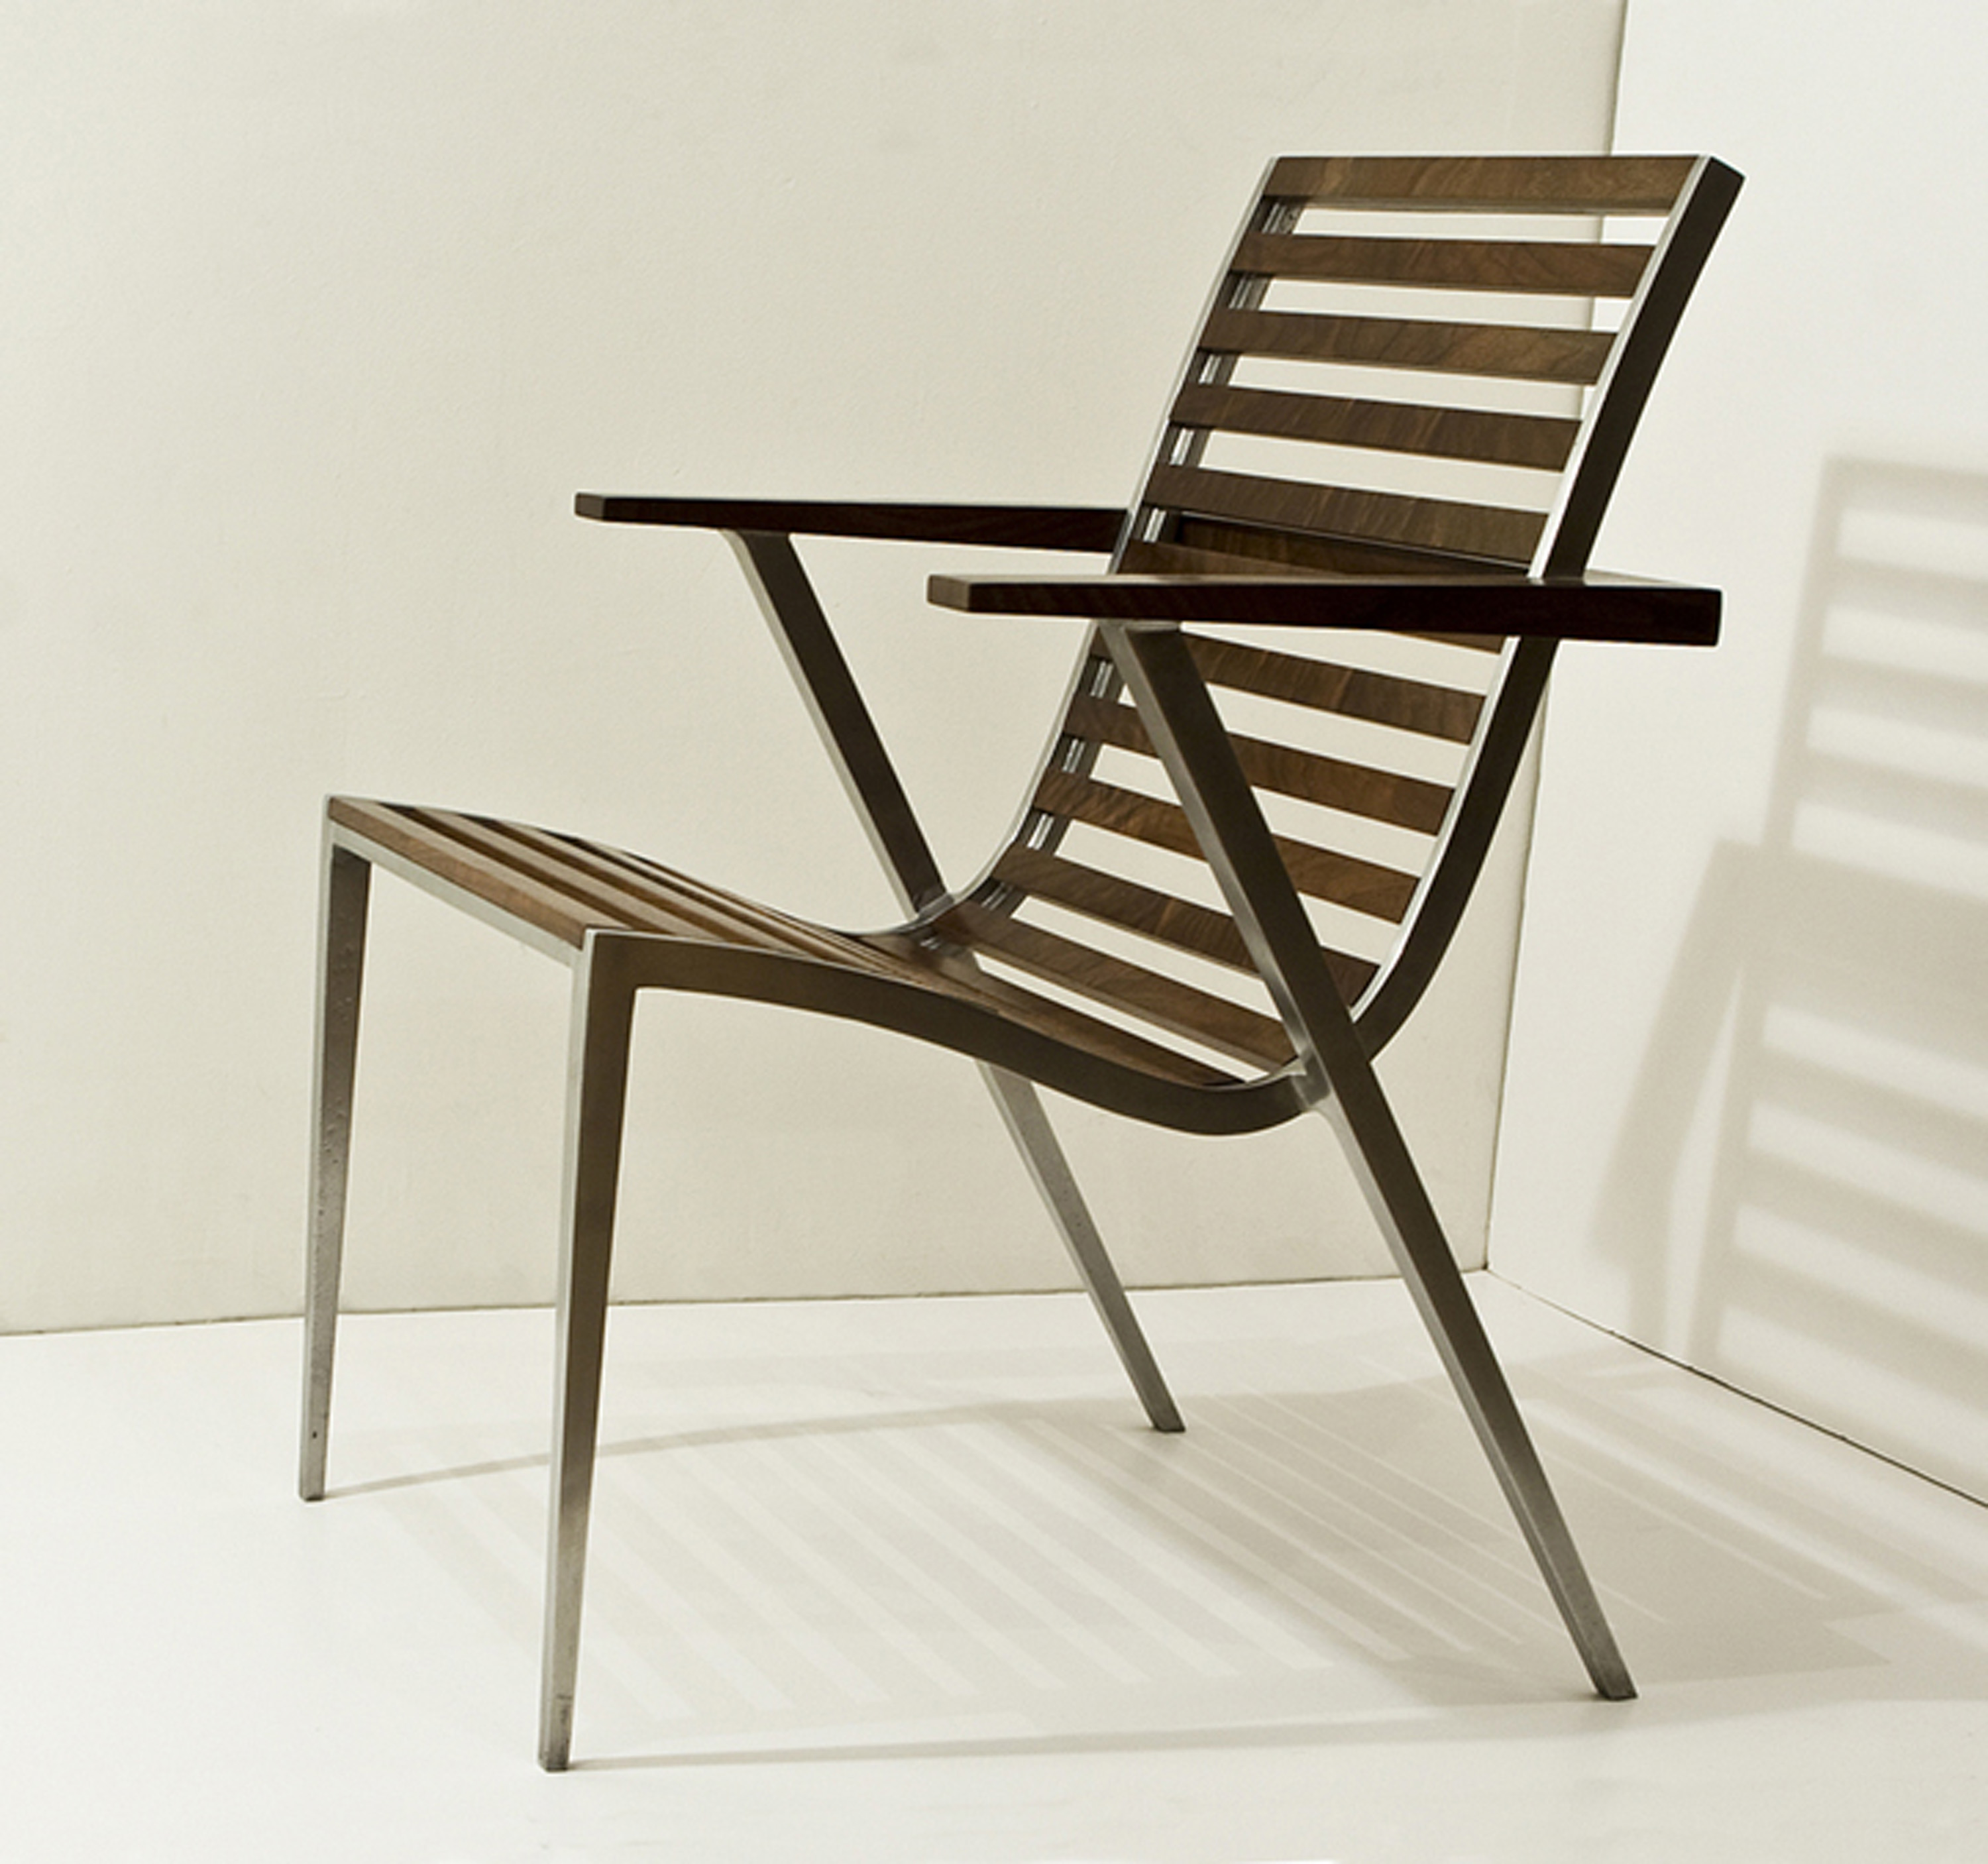 This is a photo of an aluminum and walnut dining chair seen from three-quarters view